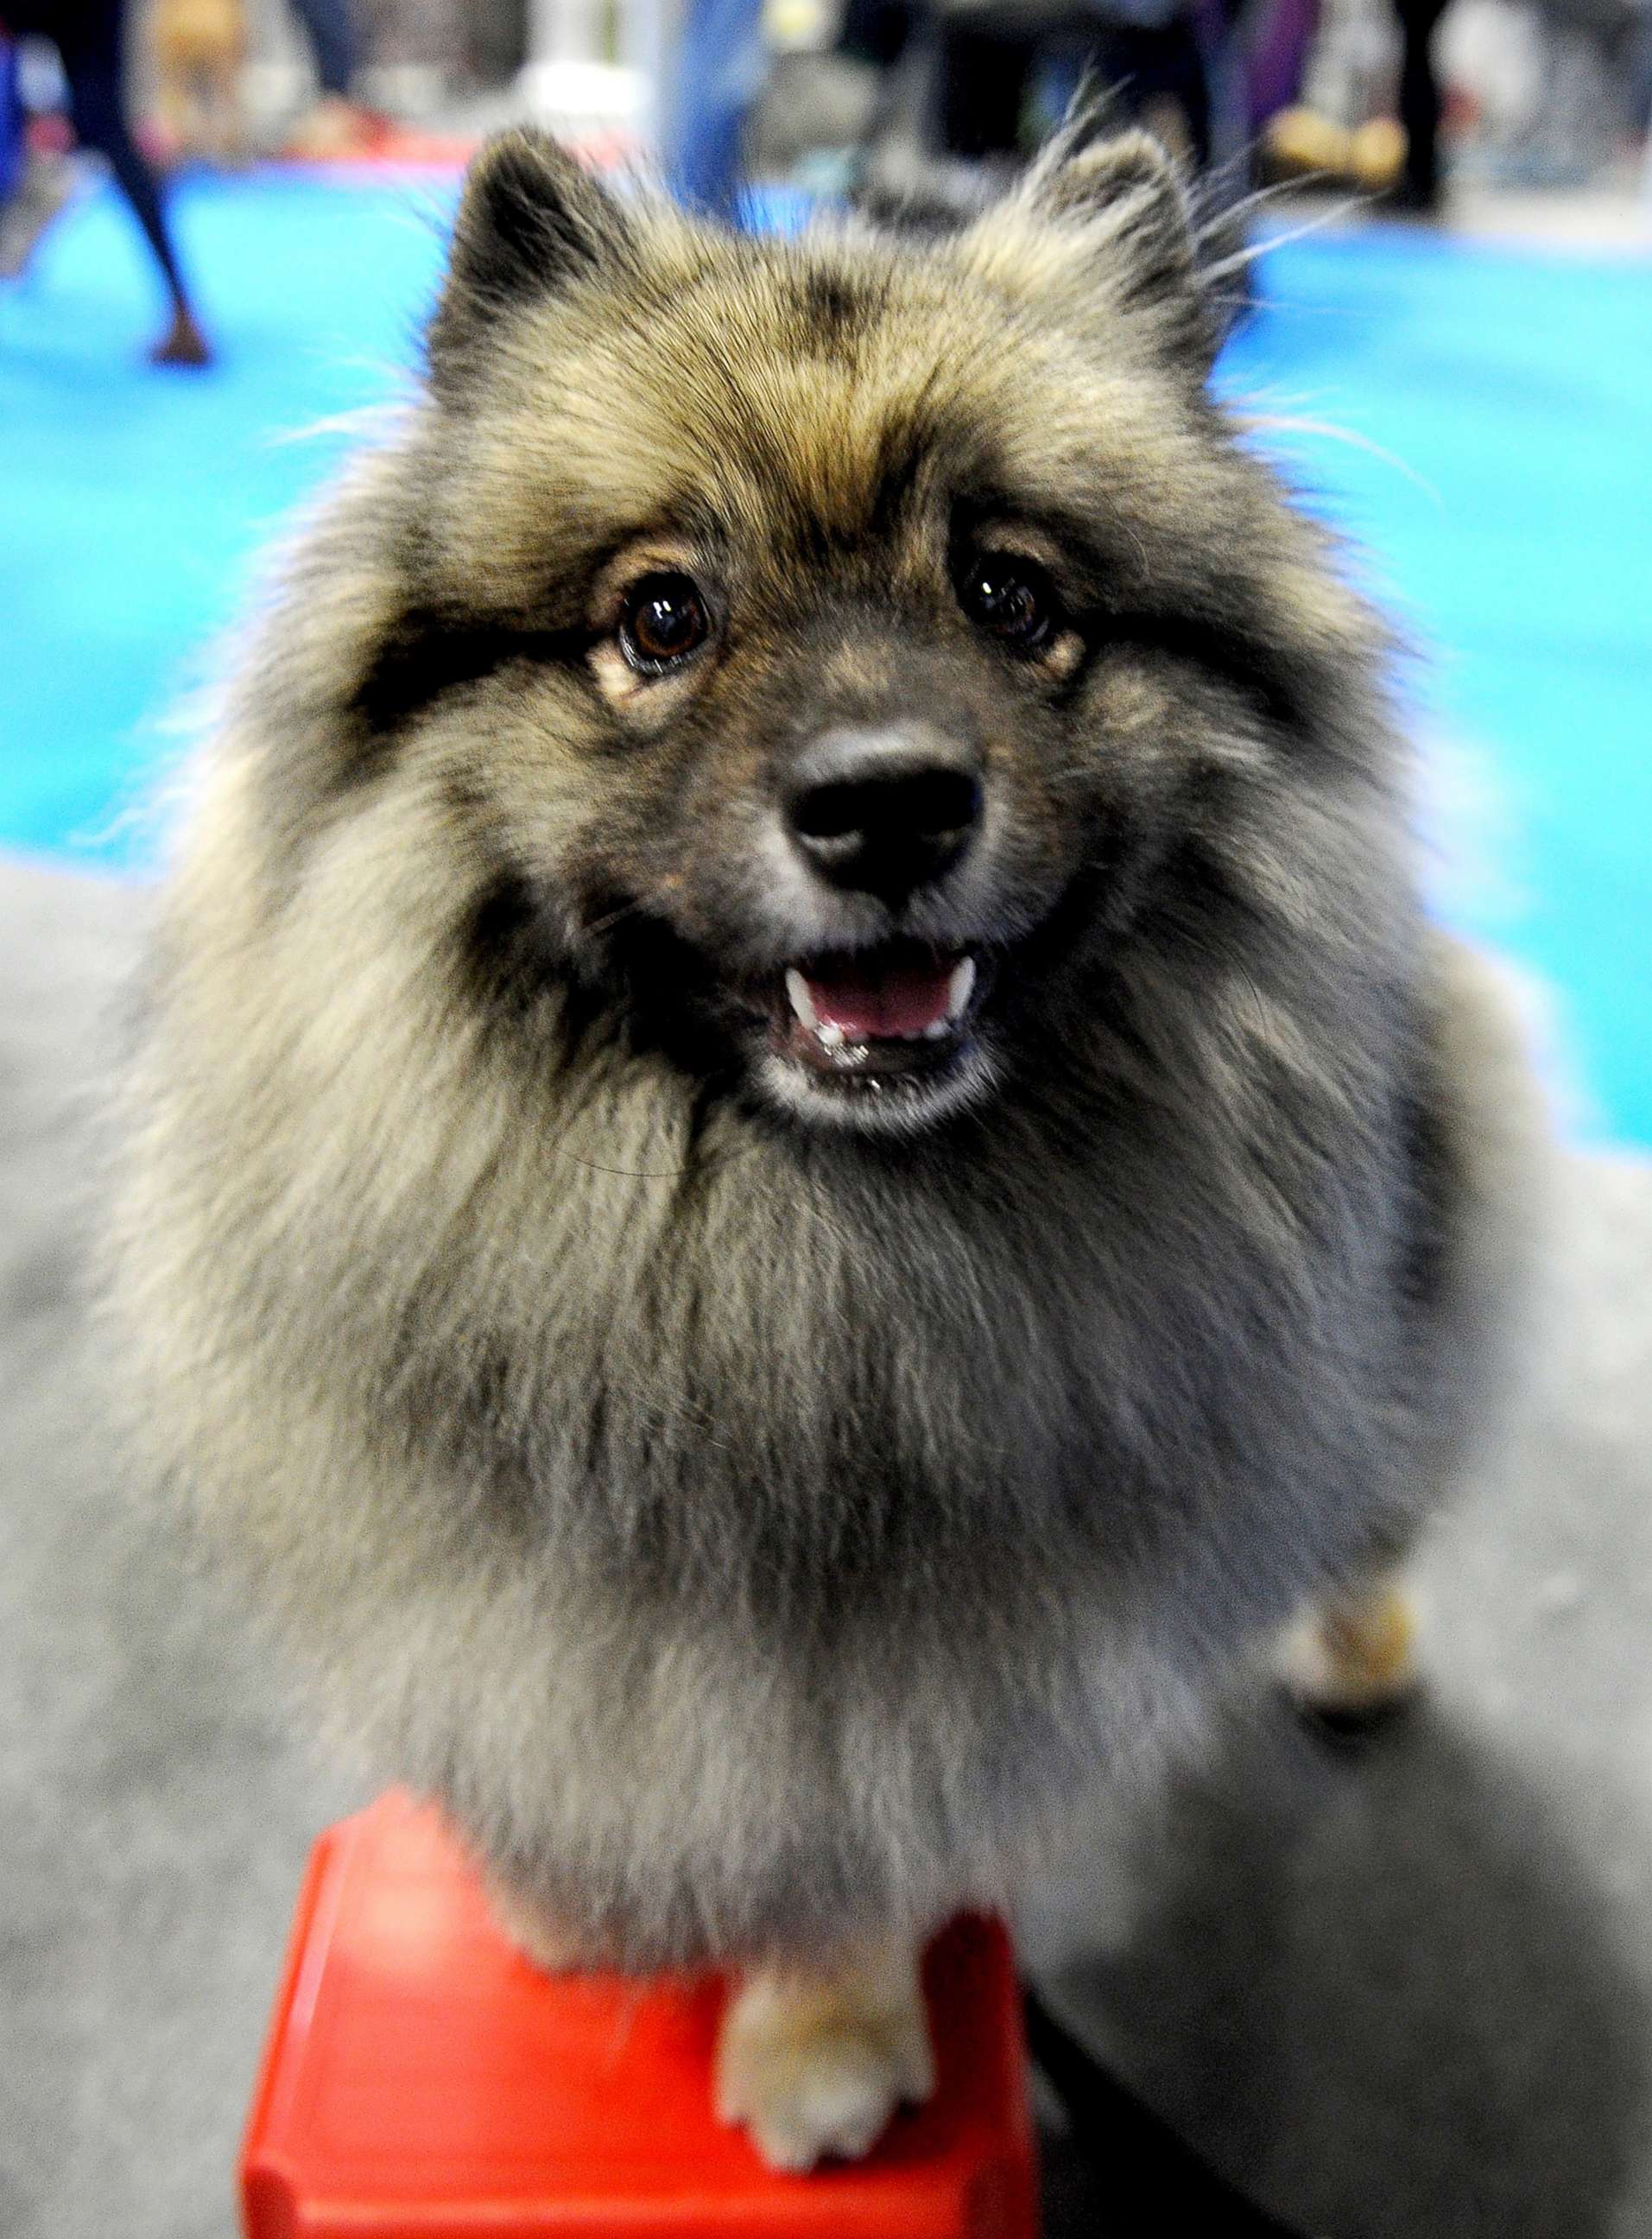 PHOTO: Pandora, a Keeshond attends the National Pet Show on Nov. 4, 2017, in Birmingham, England.  